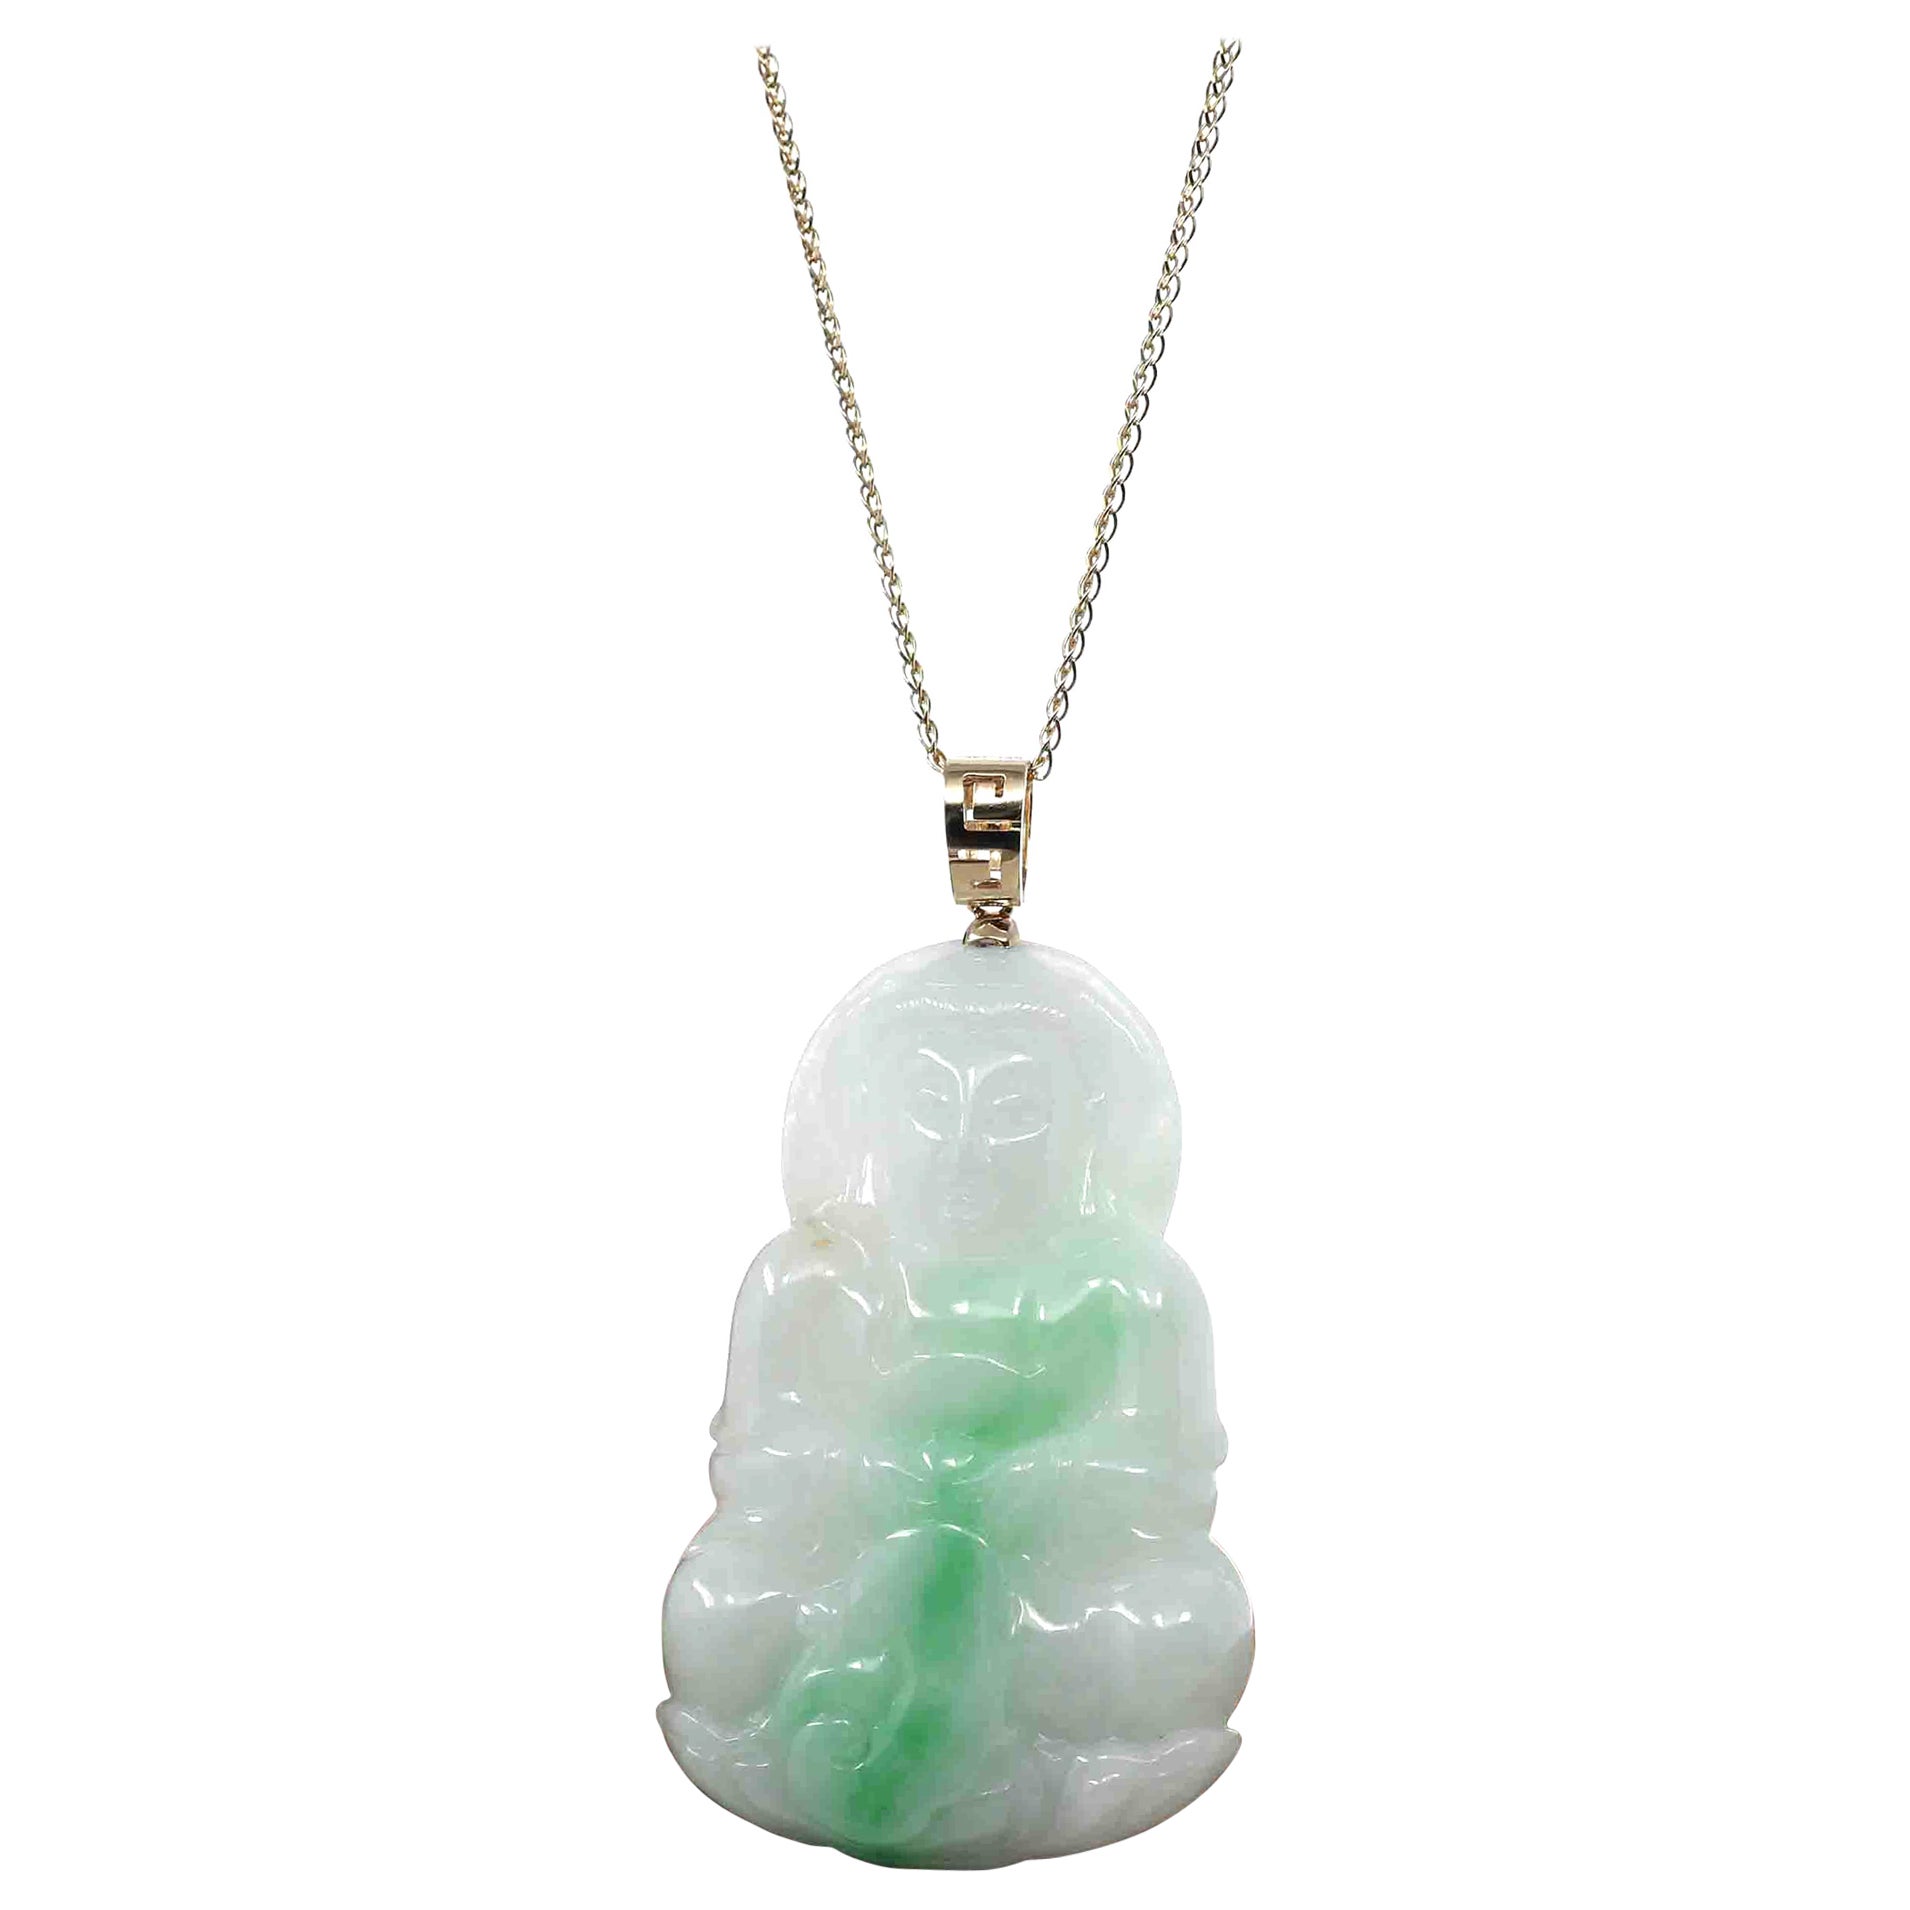 "Goddess of Compassion" 14k Yellow Gold Burmese Jadeite Jade Guanyin Necklace For Sale